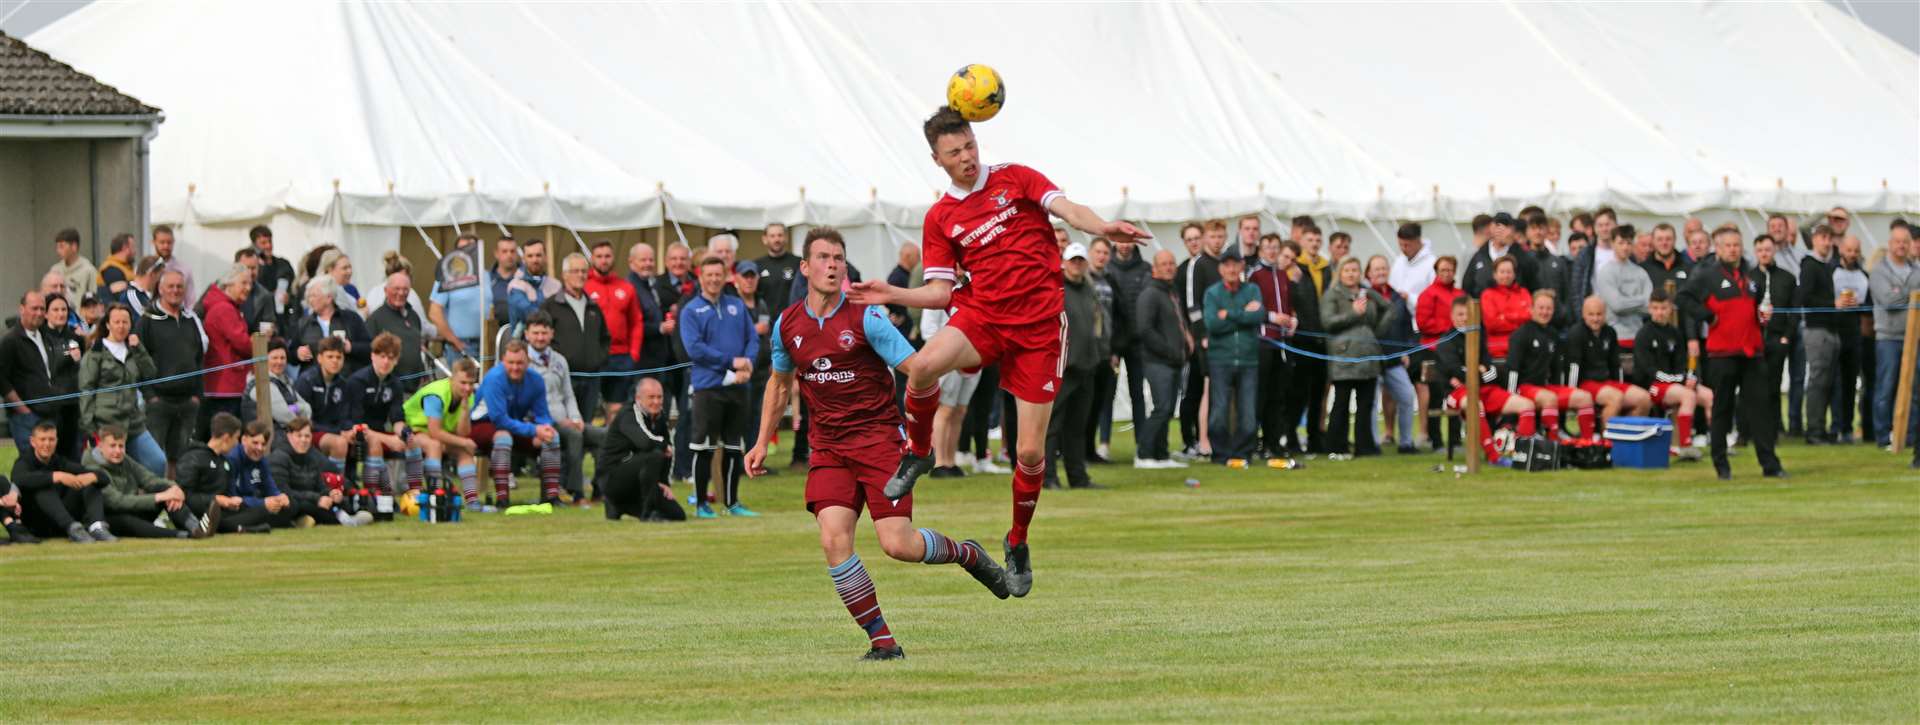 Conor Farquhar (Wick Groats) wins the ball from Allan Munro (Pentland United) during the Eain Mackintosh Cup final at Halkirk. Picture: James Gunn